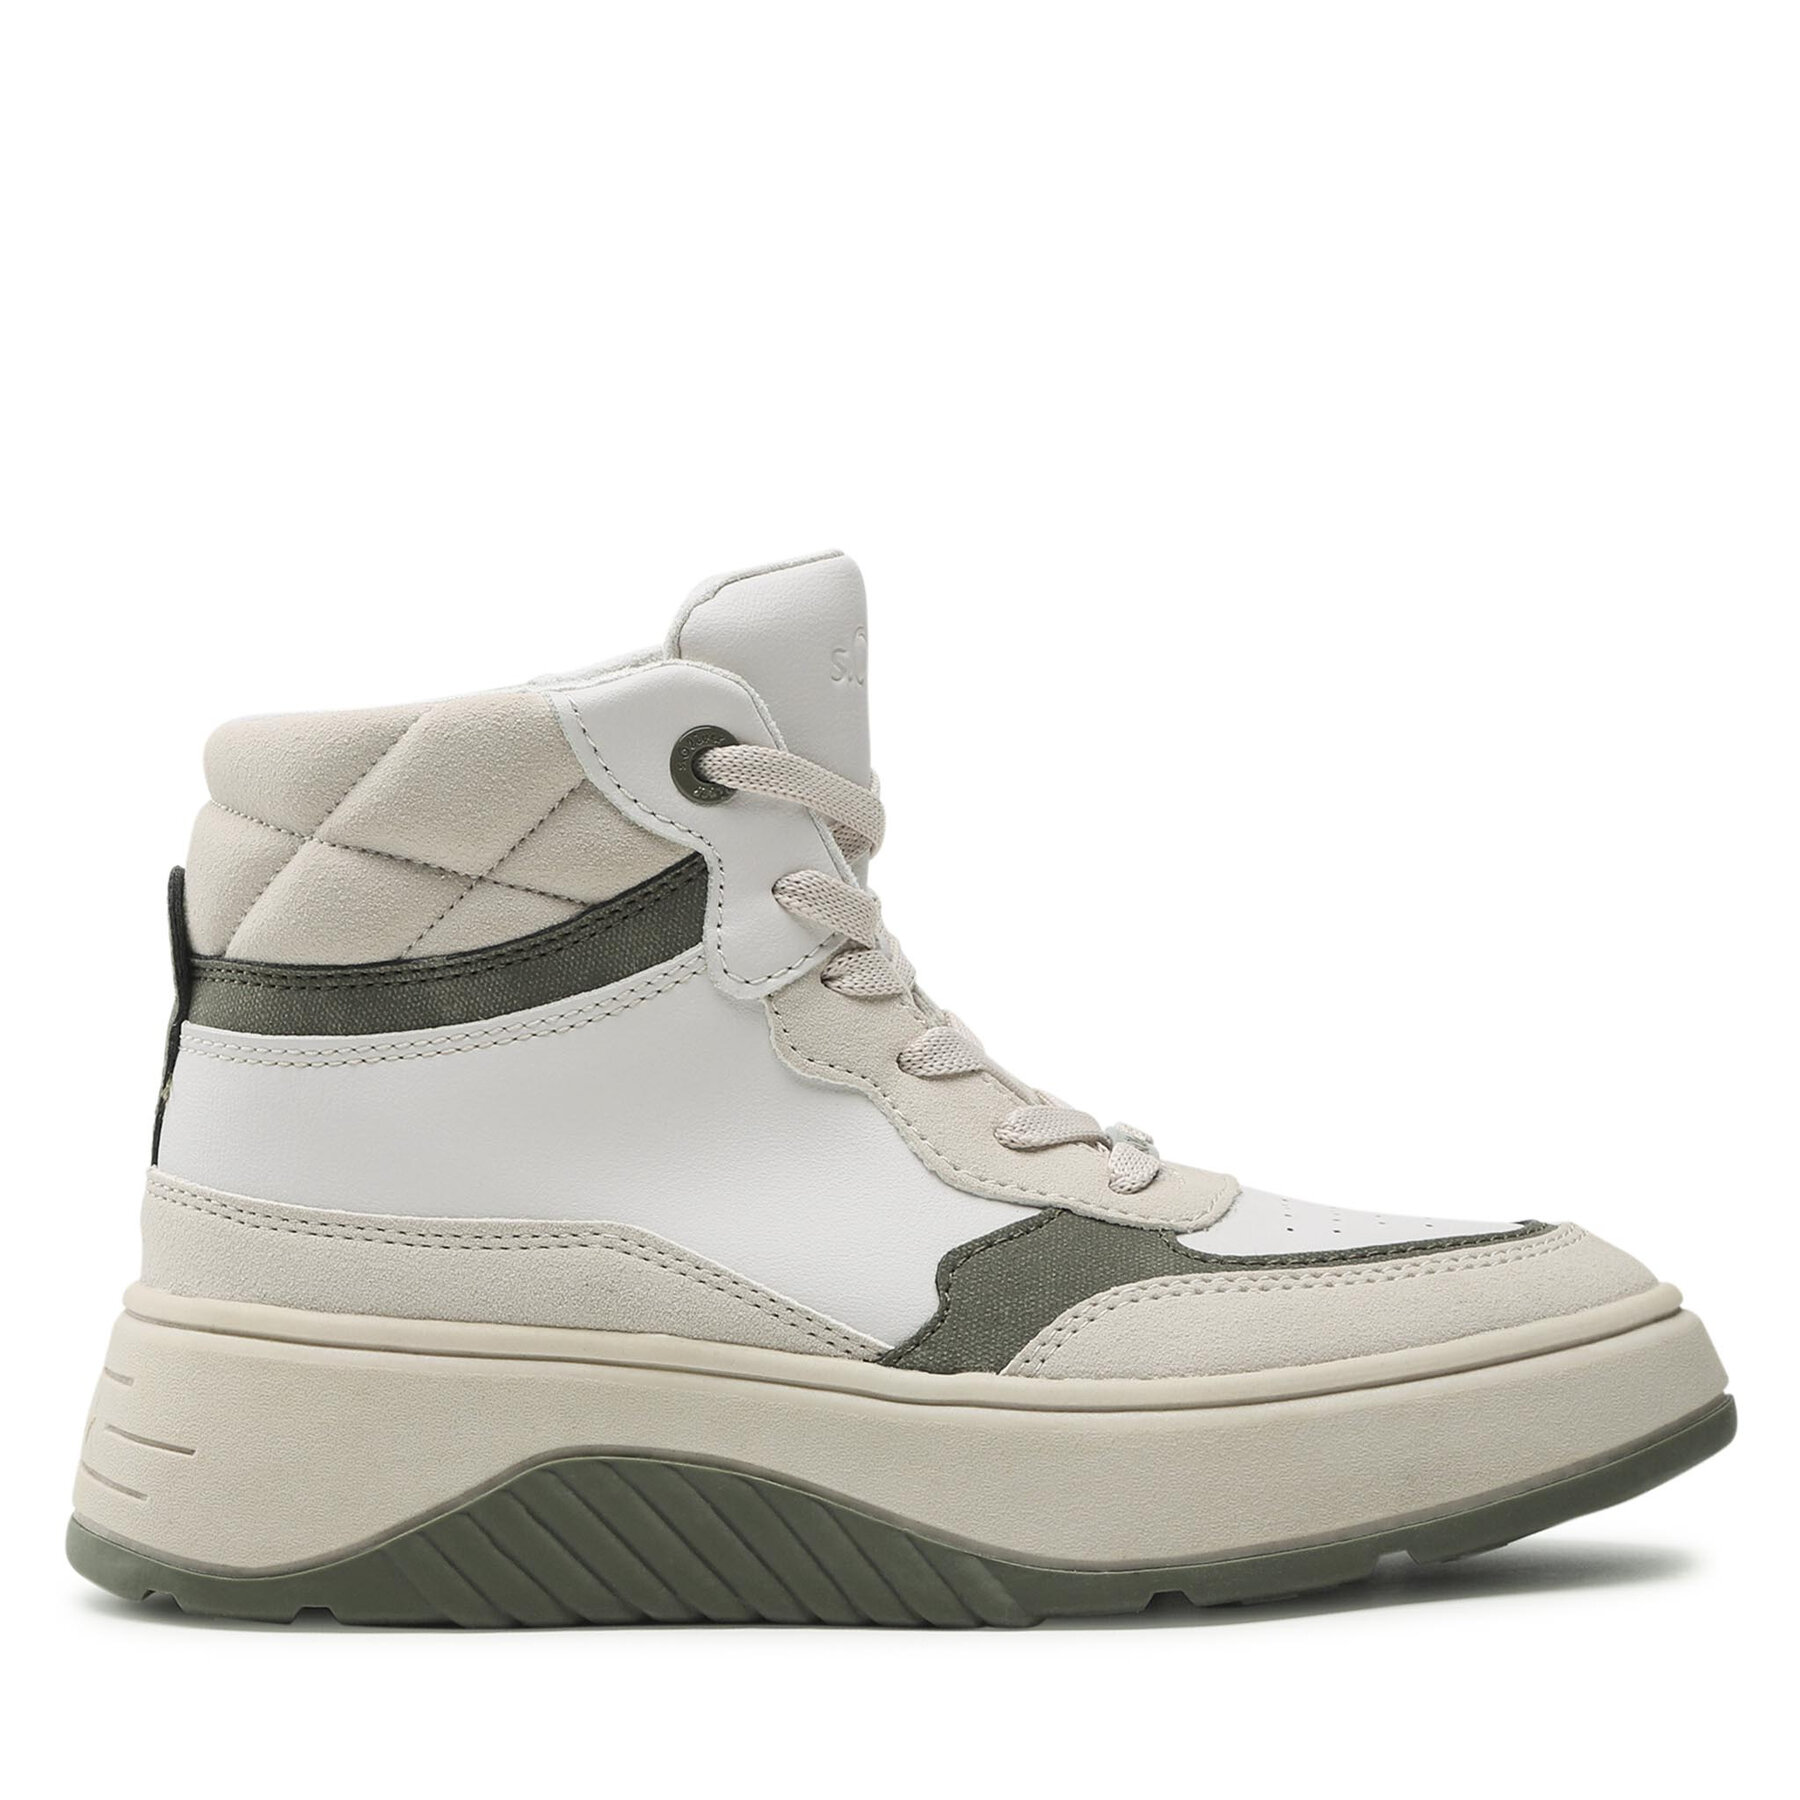 Sneakers s.Oliver 5-25201-39 Offwhite Comb. 119 von s.Oliver